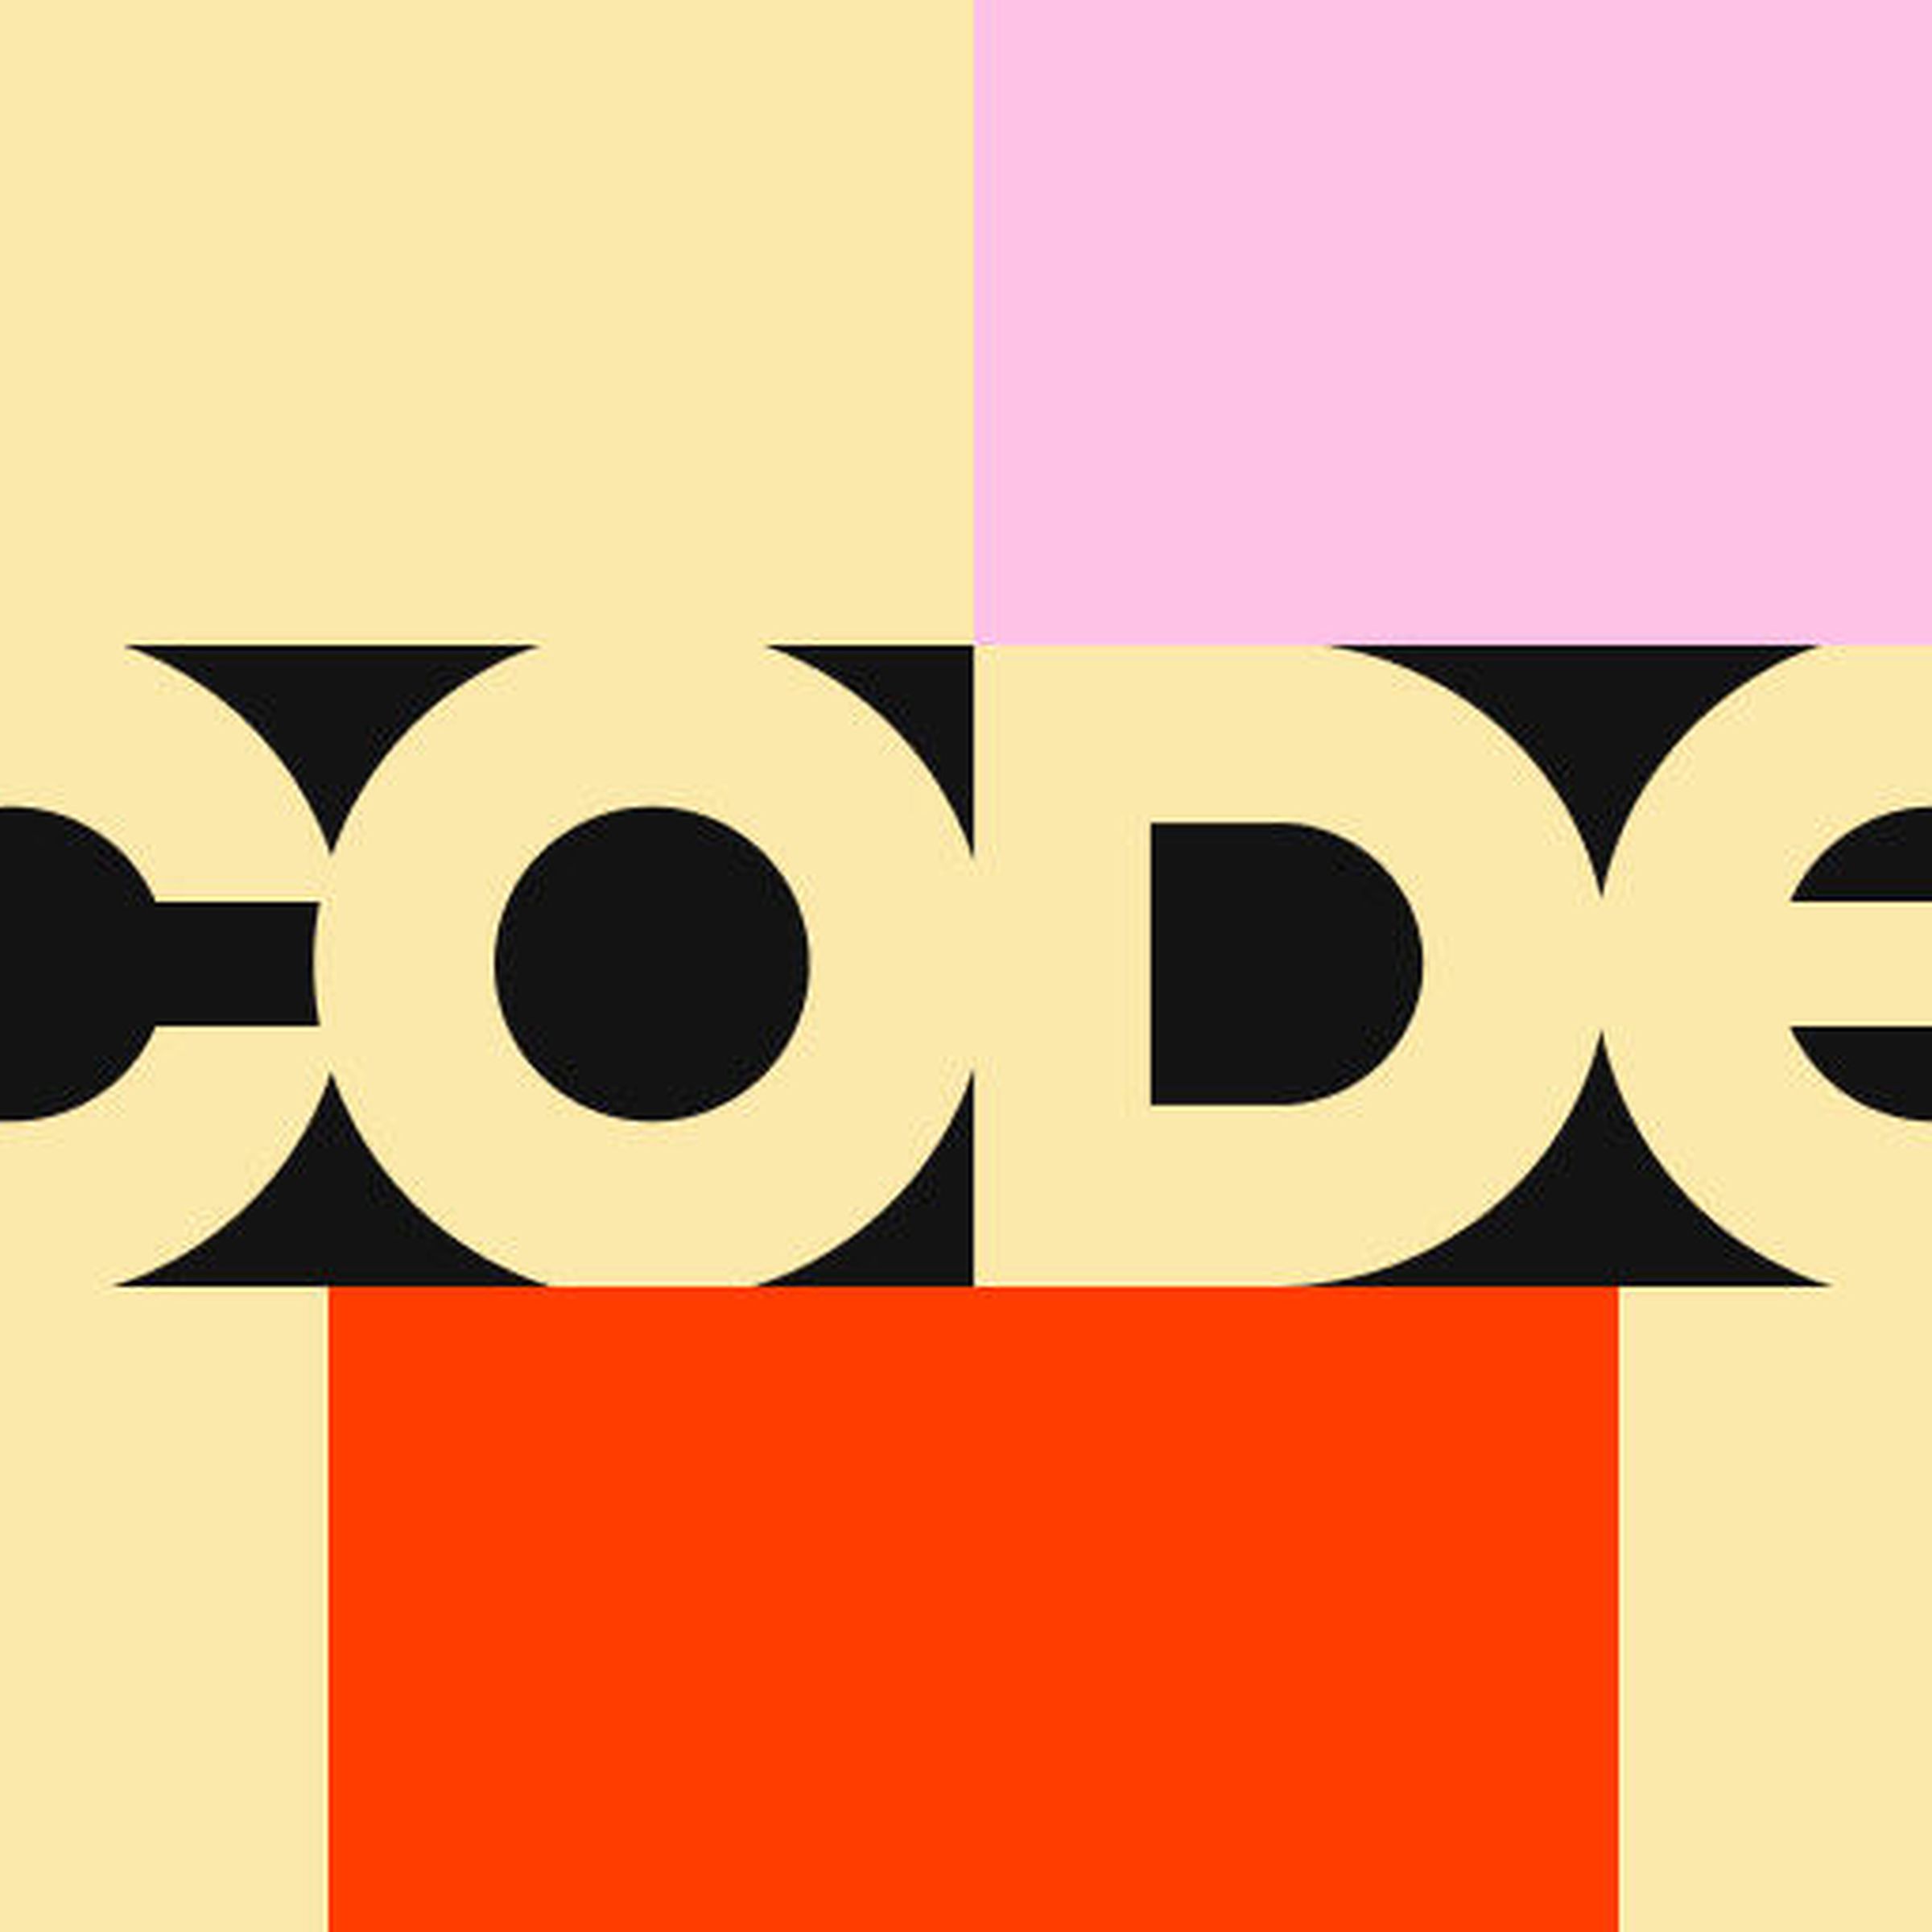 The Code Conference wordmark.